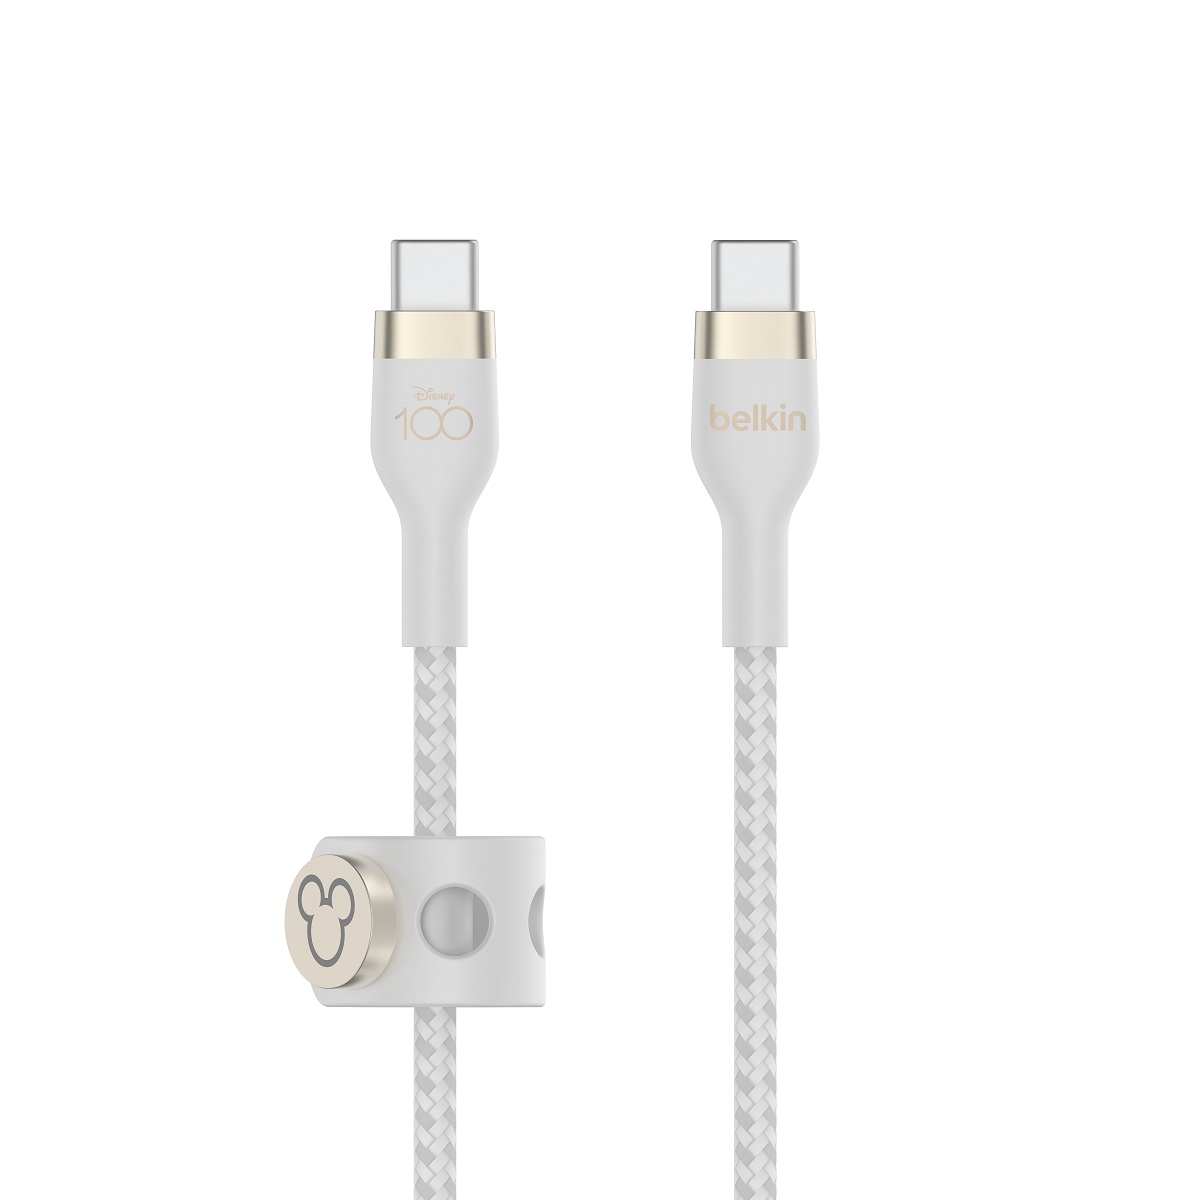 Belkin - BoostCharge Pro Flex USB-C to USB-C Cable (Disney Collection) (Disney 100th Anniversary - White)